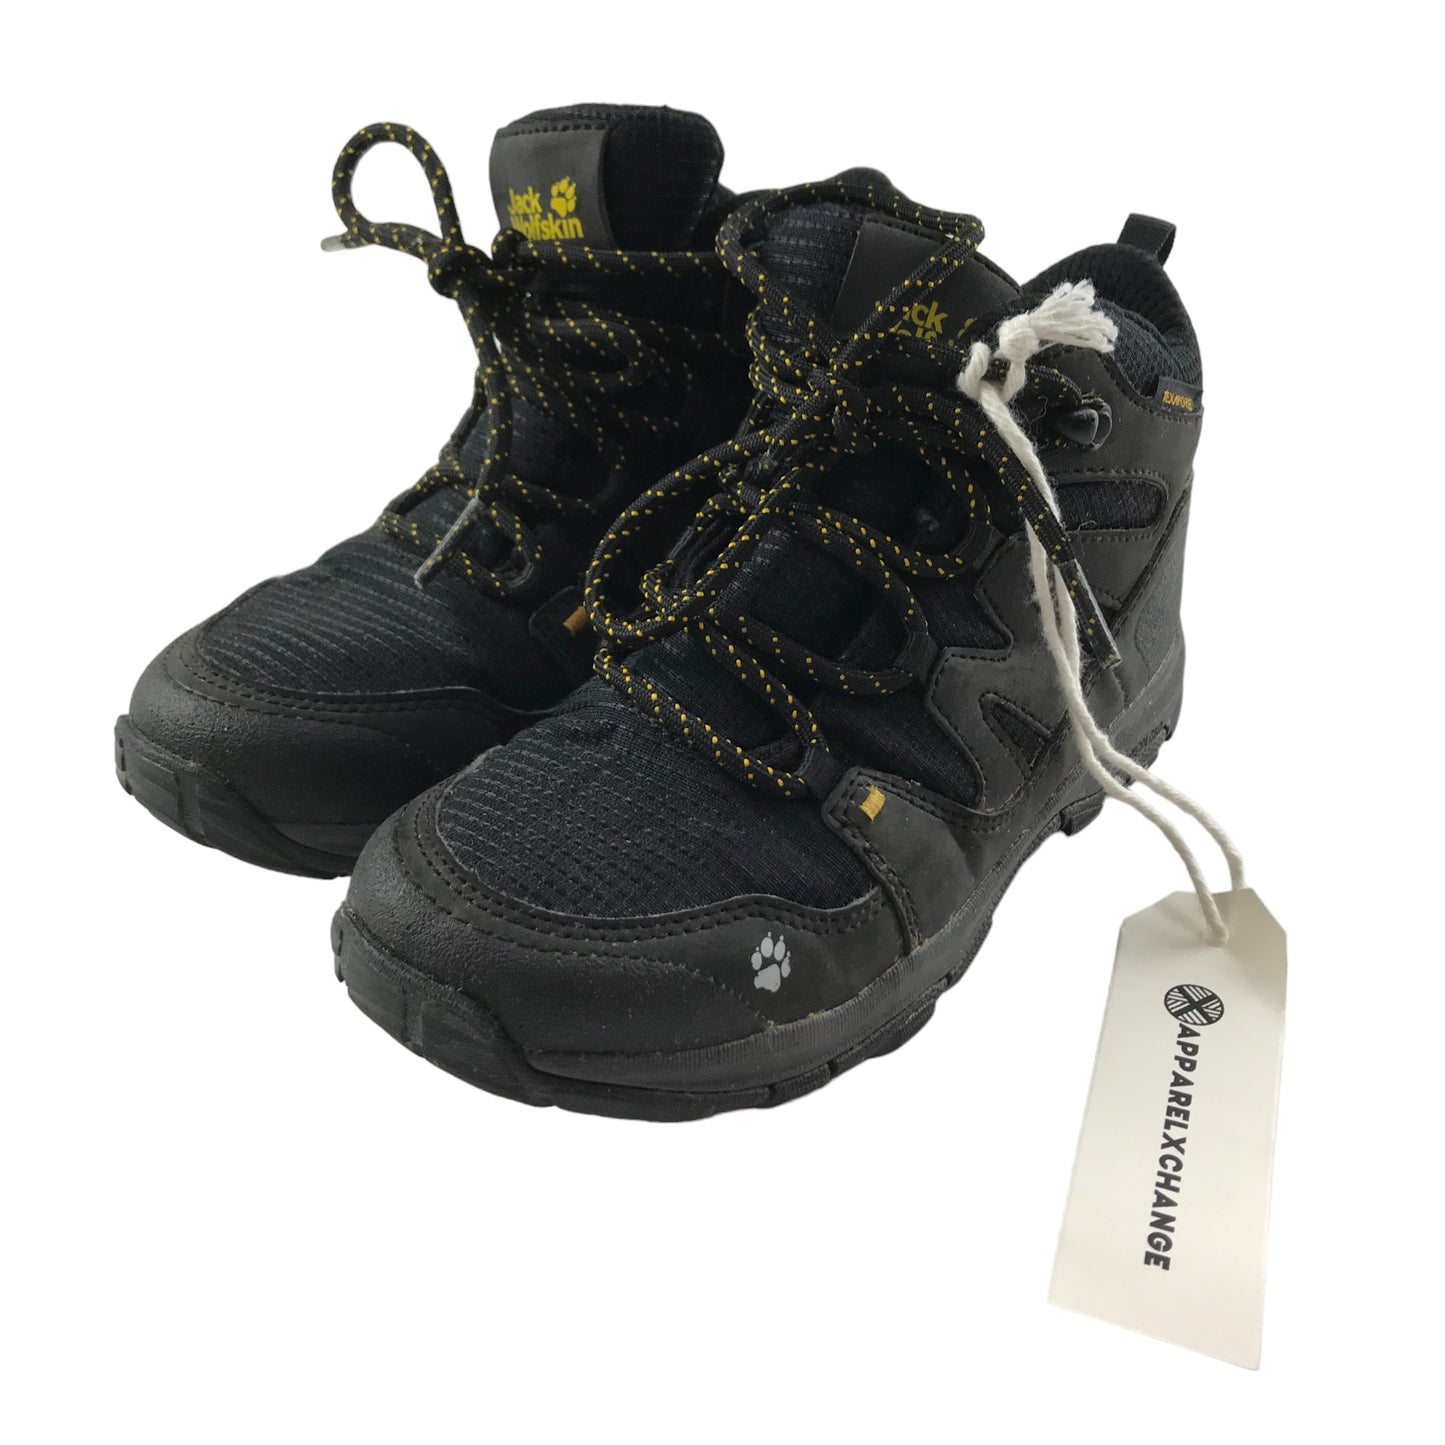 Jack Wolfskin Walking Boots Shoe Size 13 Junior Black Texapore with Laces